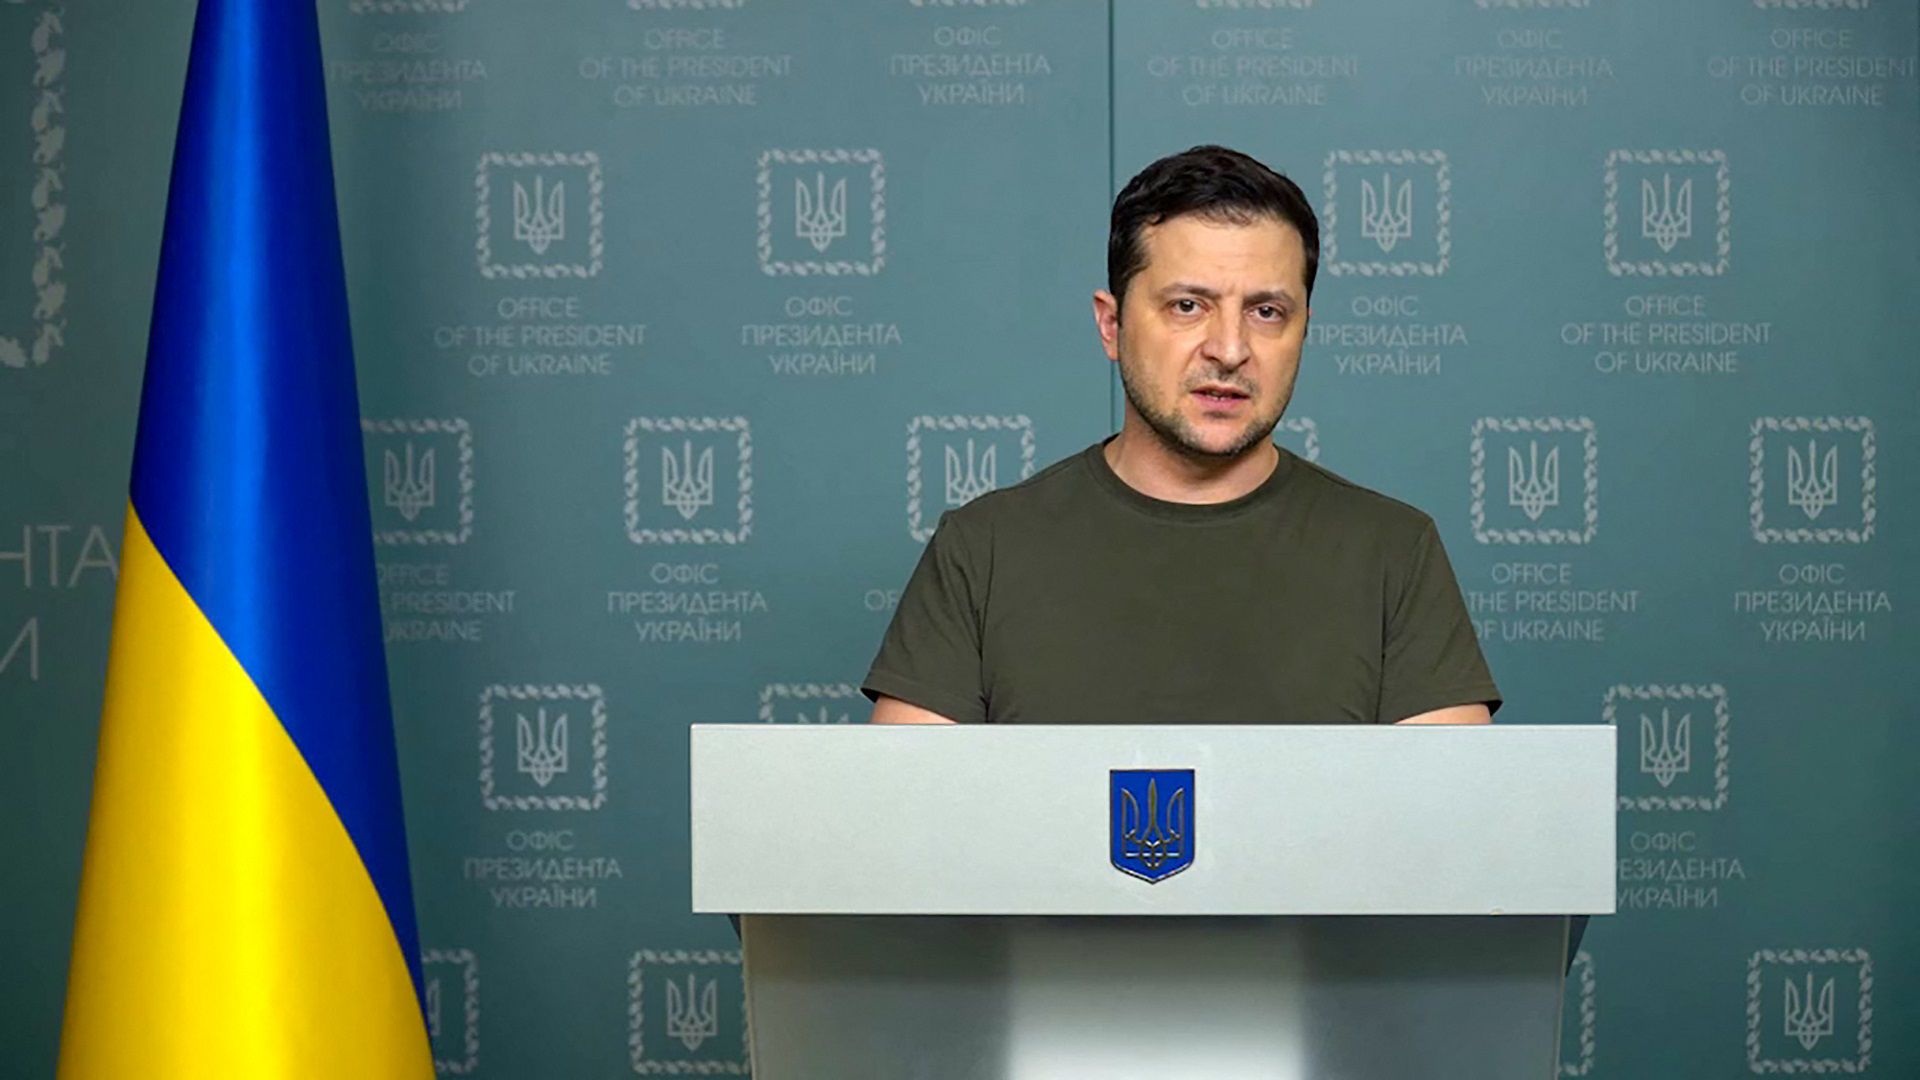 This handout video grab taken and released by the Ukraine Presidency press service on February 27, 2022 shows Ukrainian President Volodymyr Zelensky delivering an address in Kyiv. - President Volodymyr Zelensky said on February 27 Ukraine was willing to hold talks with Russia, but rejected convening them in neighbouring Belarus as it was being used as a launchpad for Moscow's invasion. "Warsaw, Bratislava, Budapest, Istanbul, Baku. We proposed all of them," Zelensky said in an address posted online. (Photo by UKRAINE PRESIDENCY / AFP) / RESTRICTED TO EDITORIAL USE - MANDATORY CREDIT "AFP PHOTO /UKRAINIAN PRESIDENCY PRESS OFFICE " - NO MARKETING - NO ADVERTISING CAMPAIGNS - DISTRIBUTED AS A SERVICE TO CLIENTS